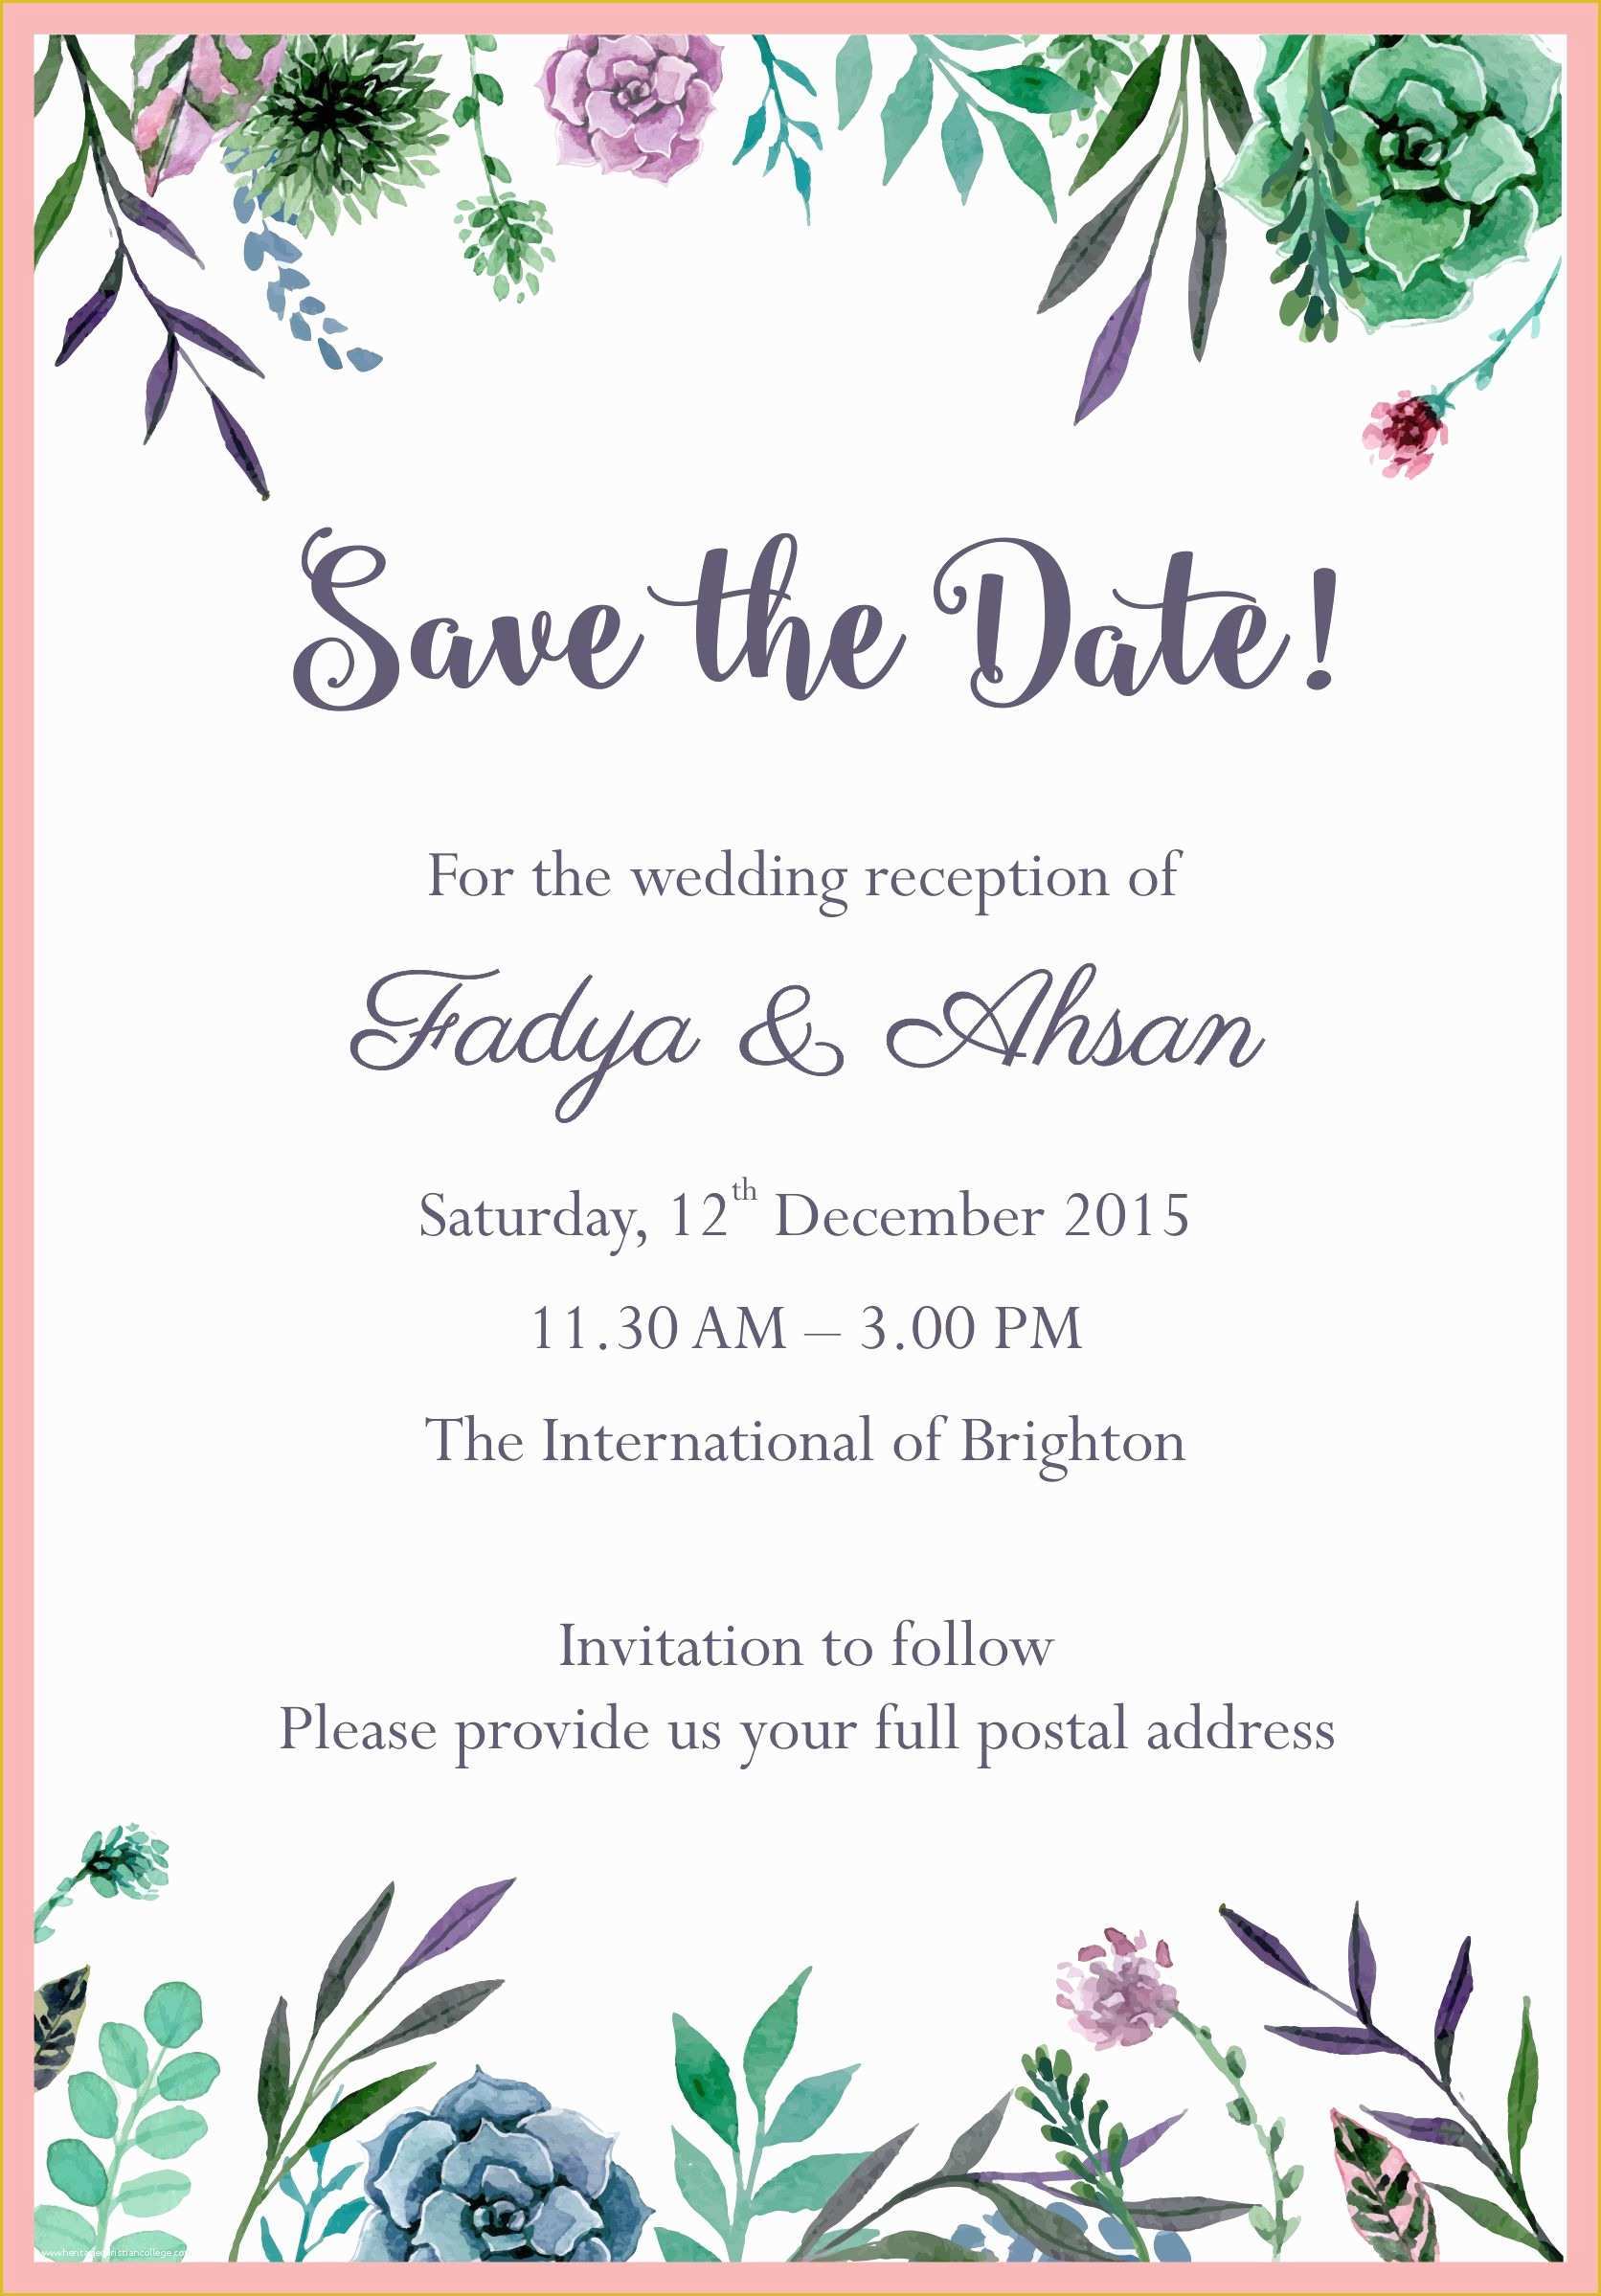 Free Email Wedding Invitation Templates Of Elegant Wedding Invitation Email Email Wedding Invitation